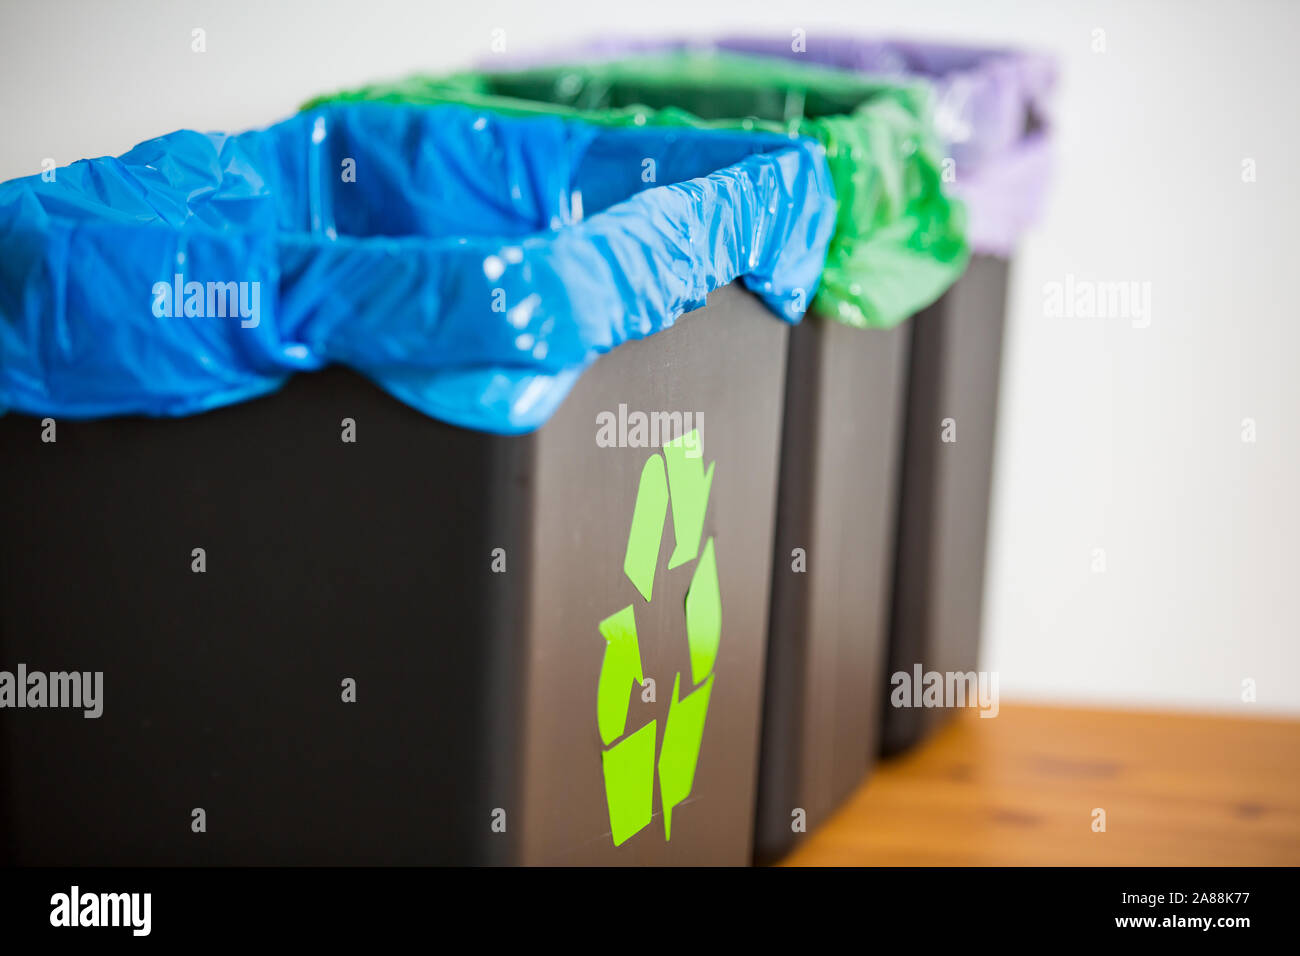 Hand putting old newspapers into recycling bin. Person in a house kitchen separating waste. Black trash bin with blue bag and recycling symbol. Stock Photo